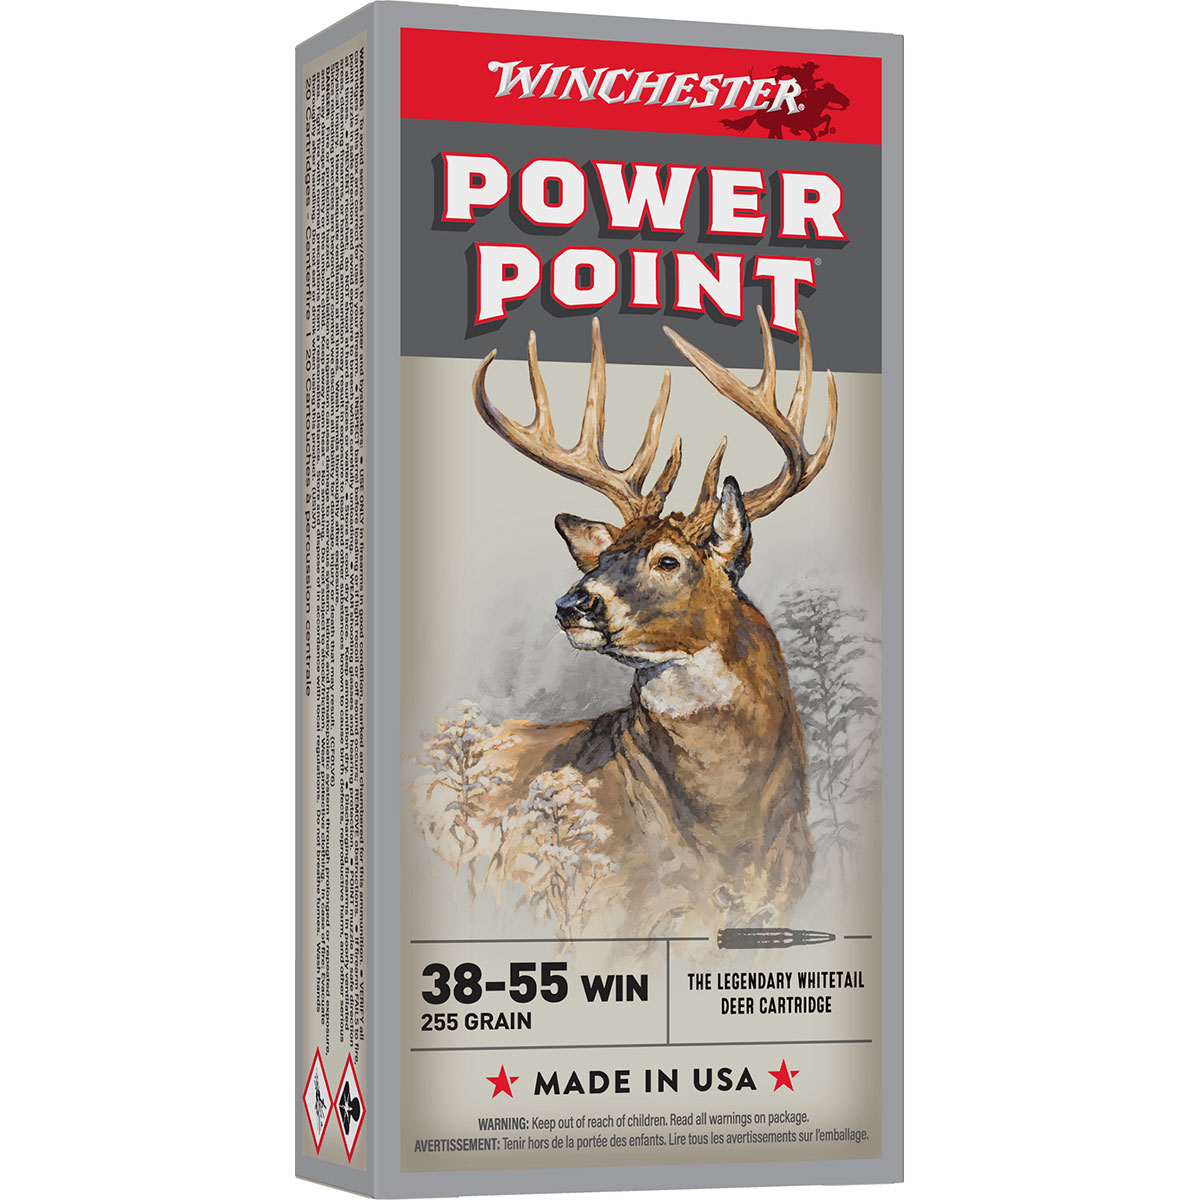 WINCHESTER - POWER POINT 38-55 WINCHESTER RIFLE AMMO